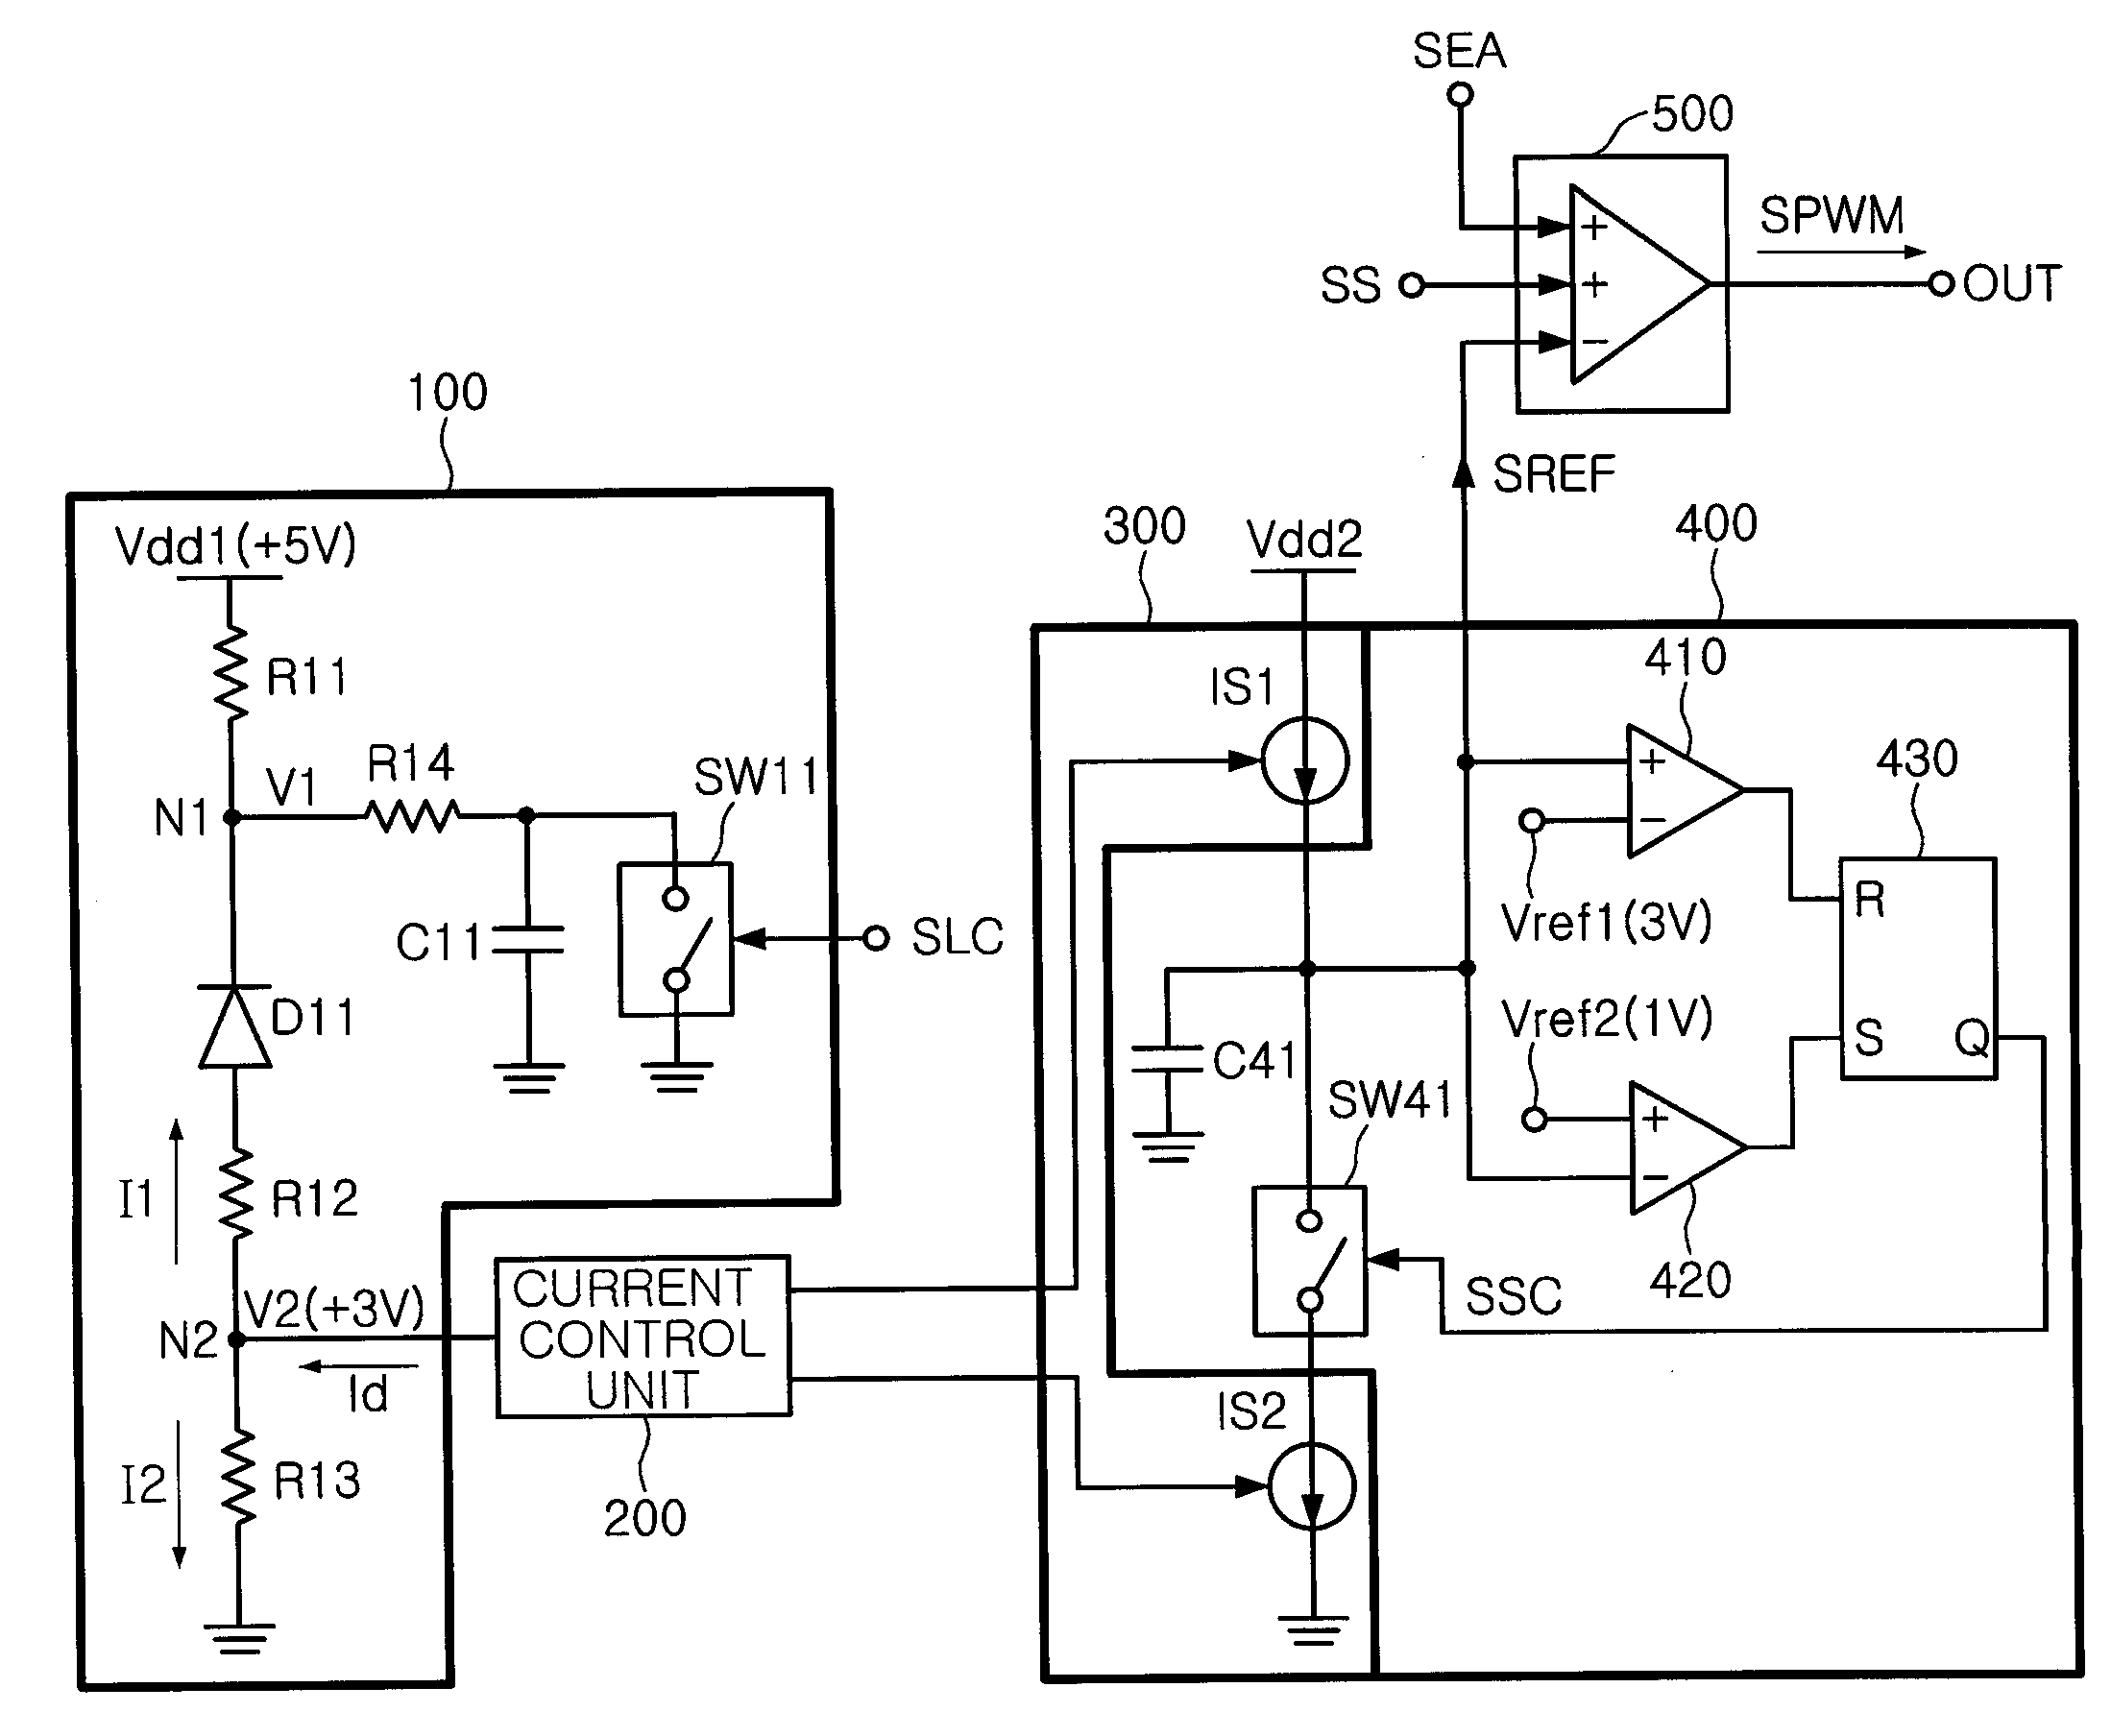 Reference signal generator and pwm control circuit for LCD backlight